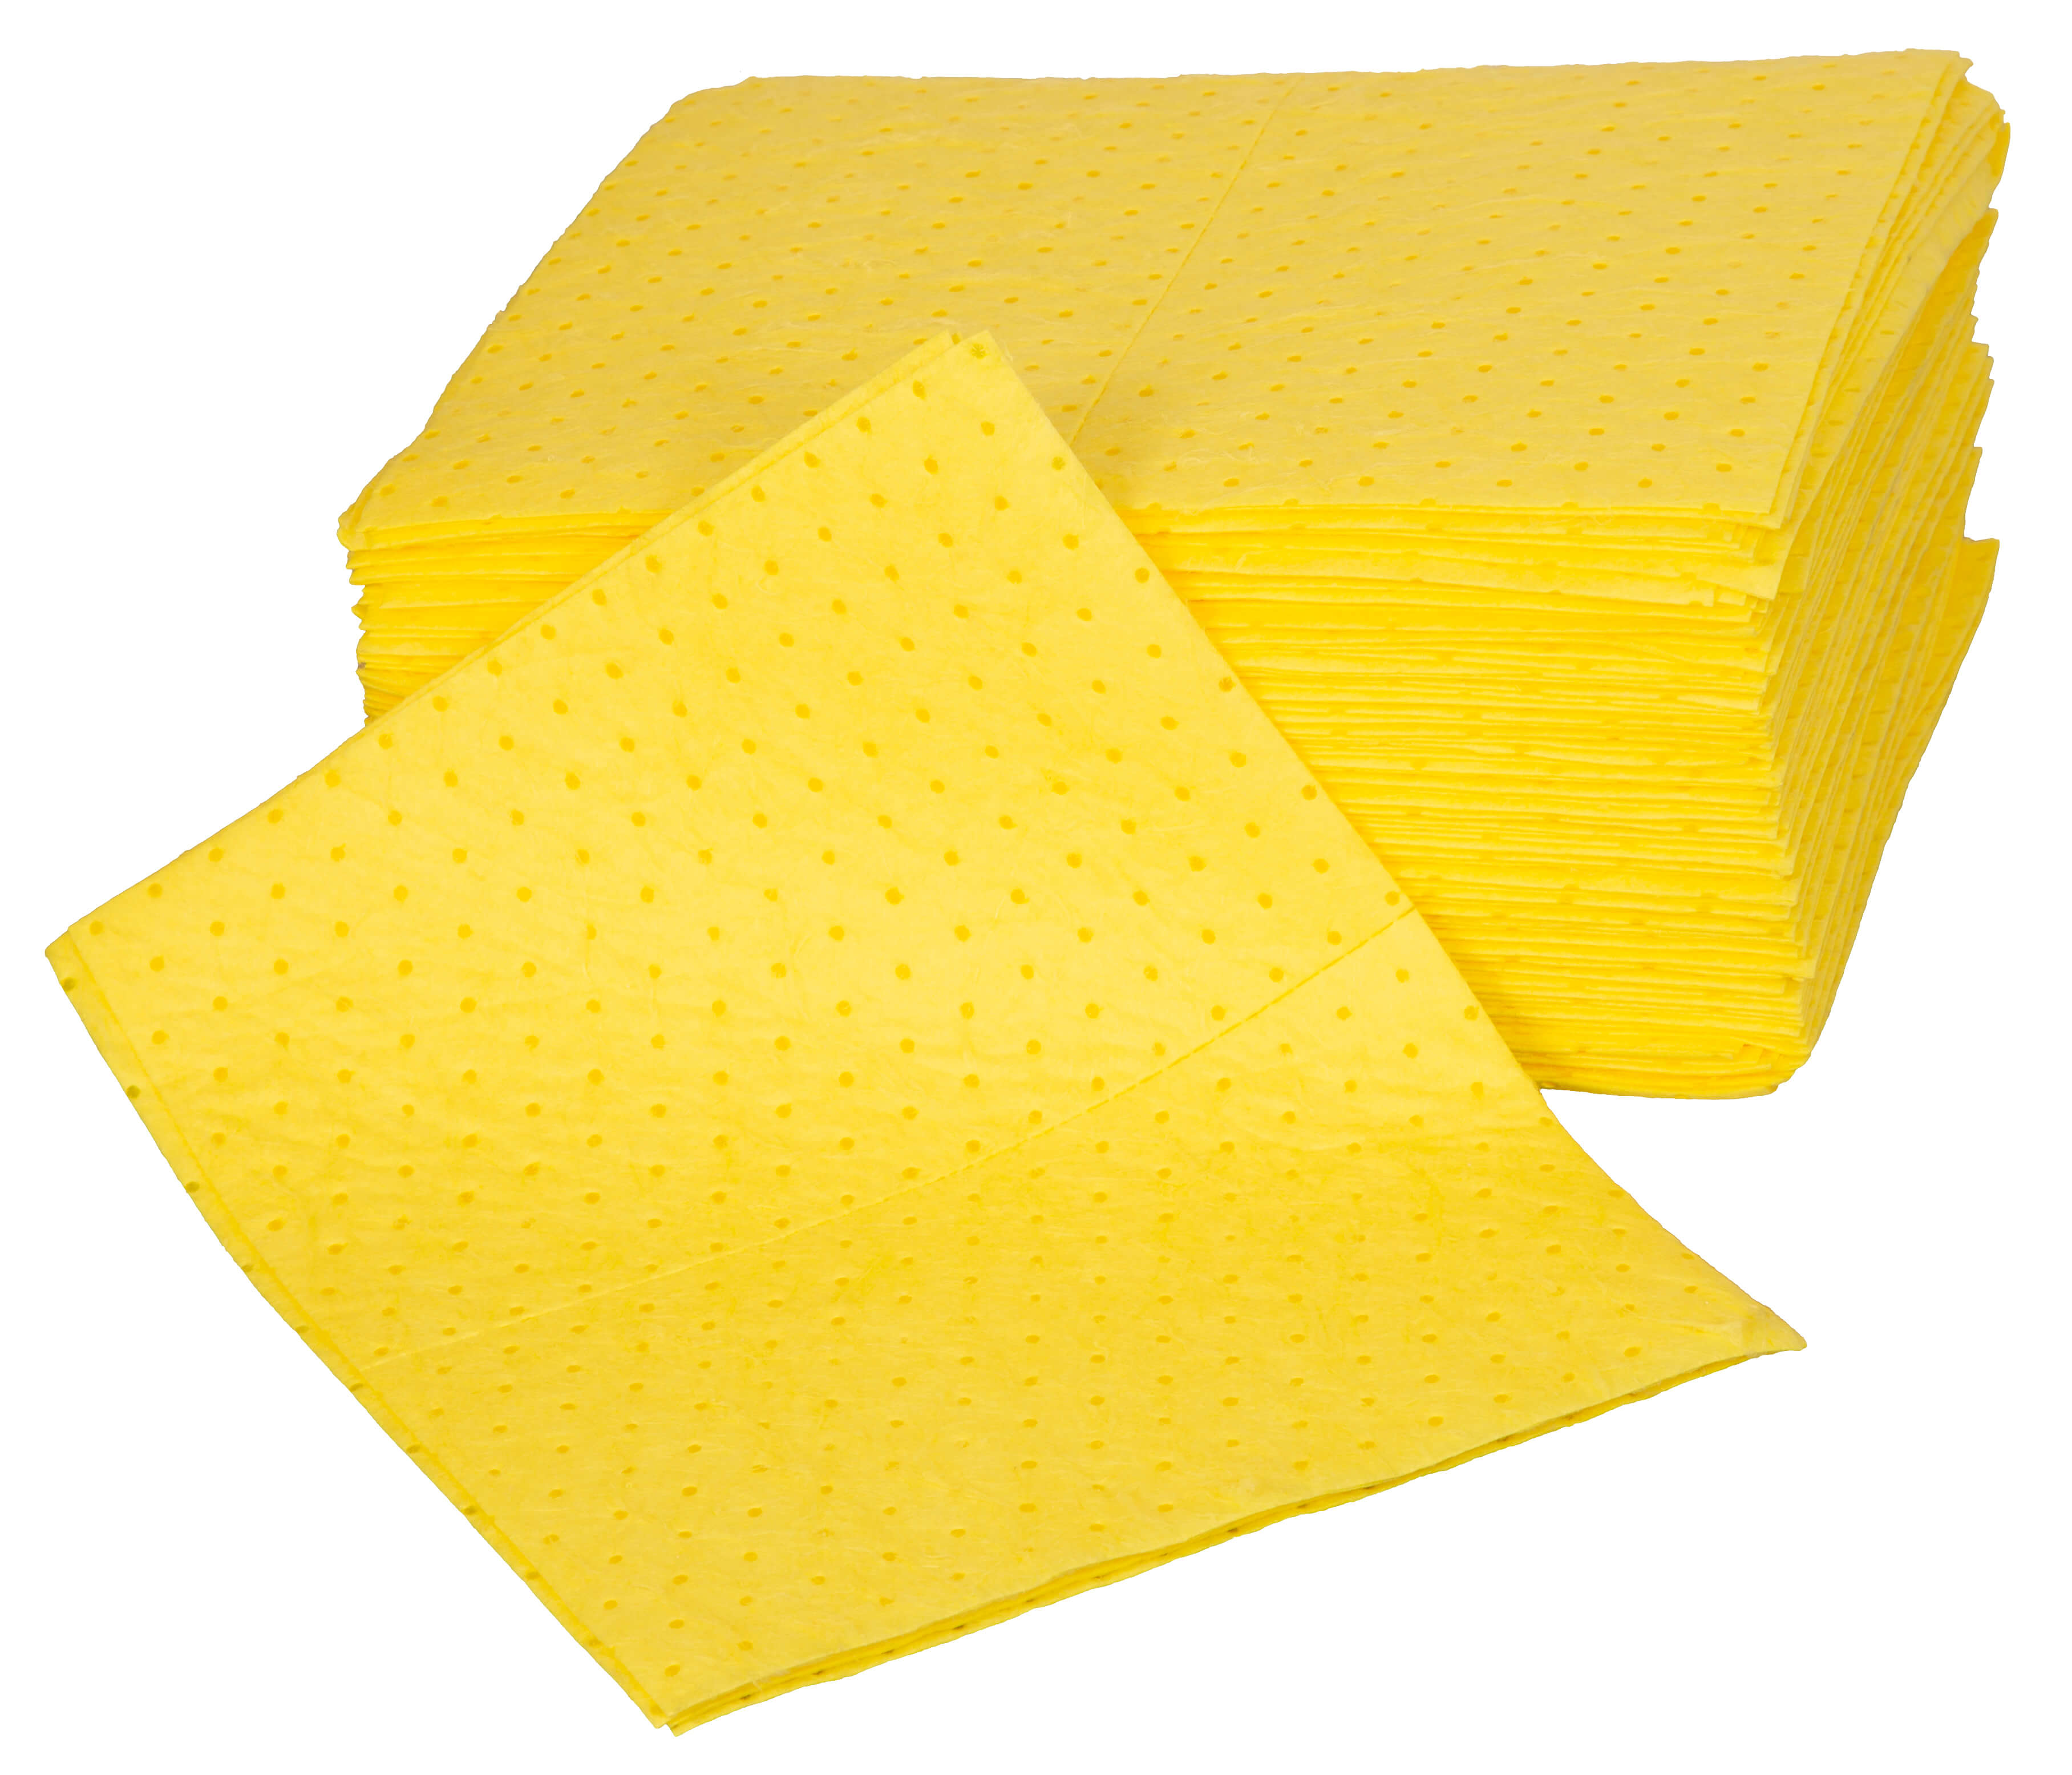 Medium Weight Chemical Absorbent Pads - Polywrapped, Pack of 100